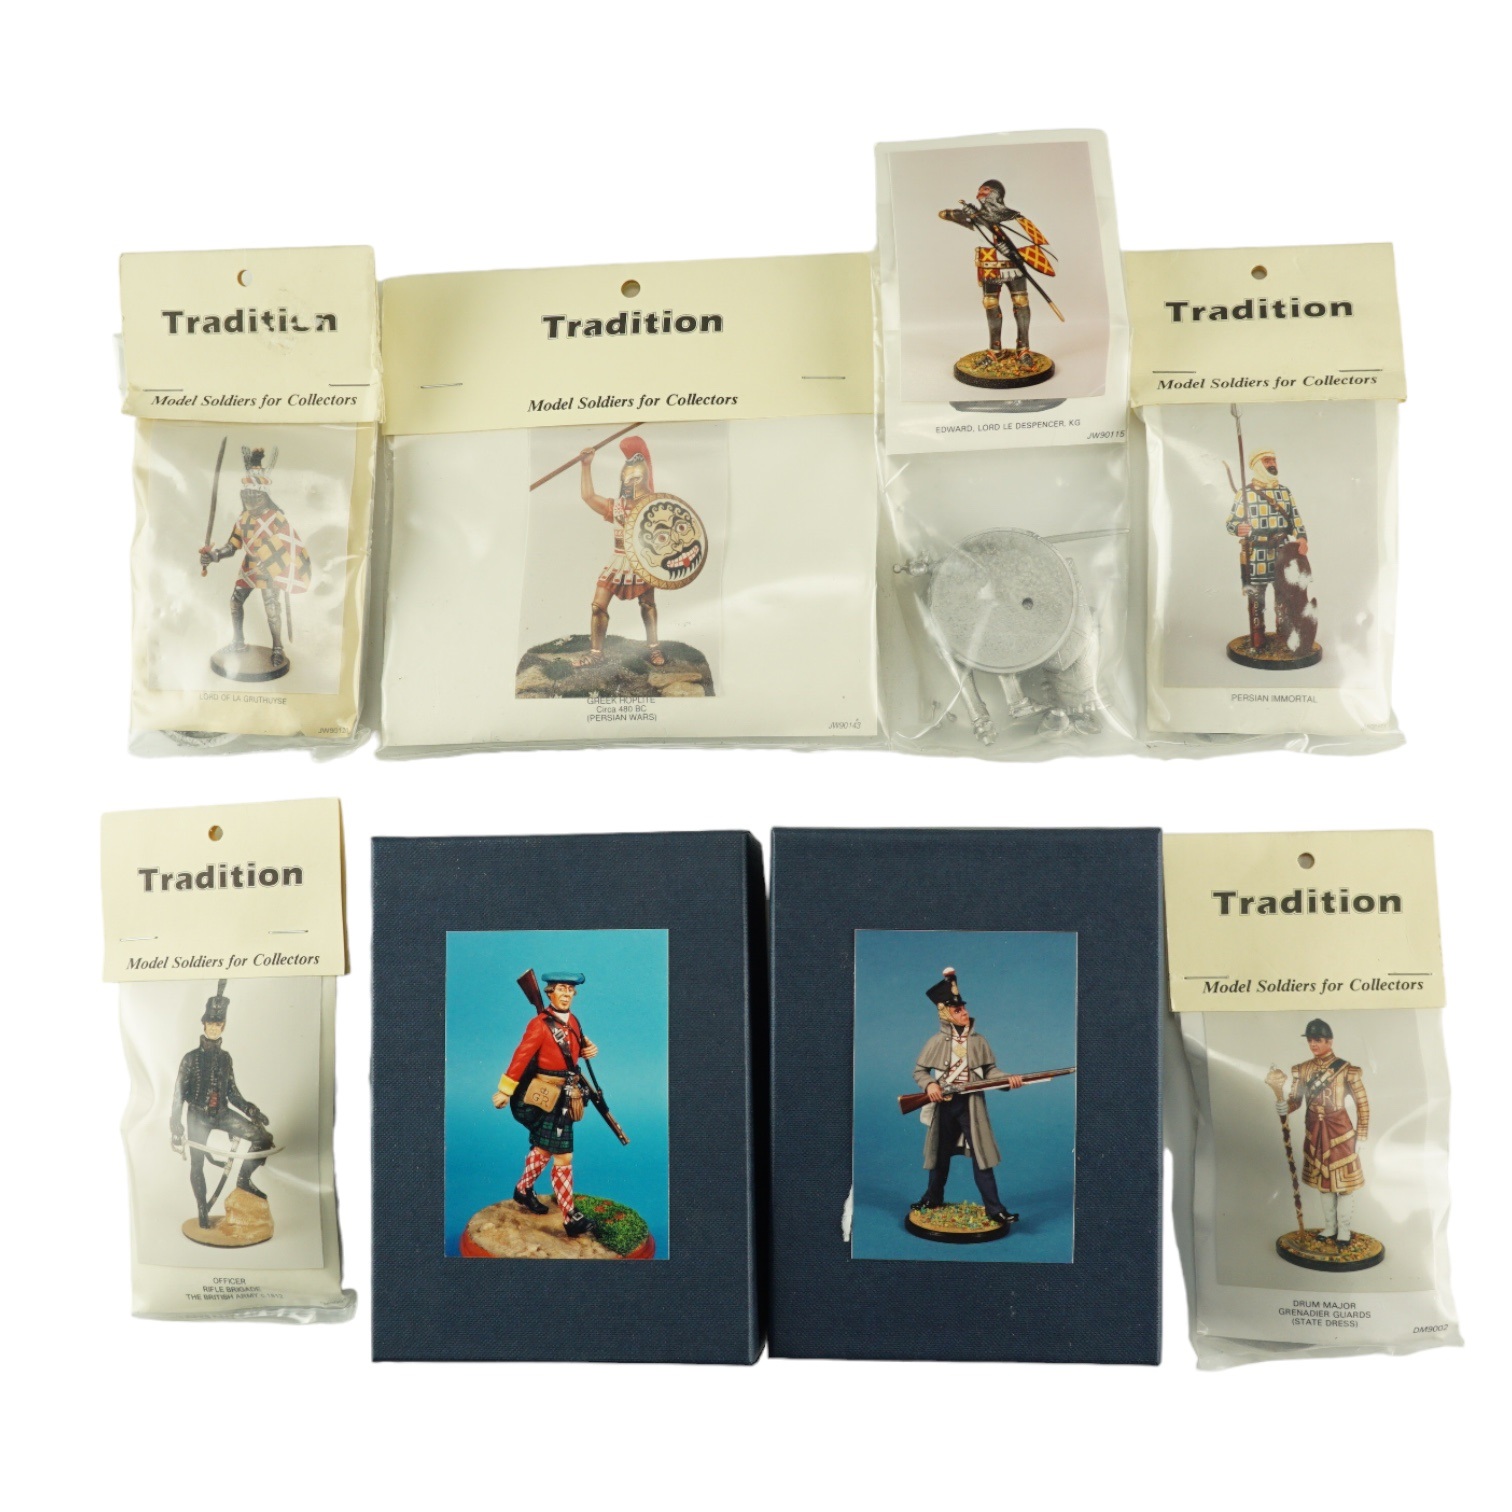 Eight Tradition "Model Soldiers for Collectors" diecast lead model kits, by Tradition of Curzon